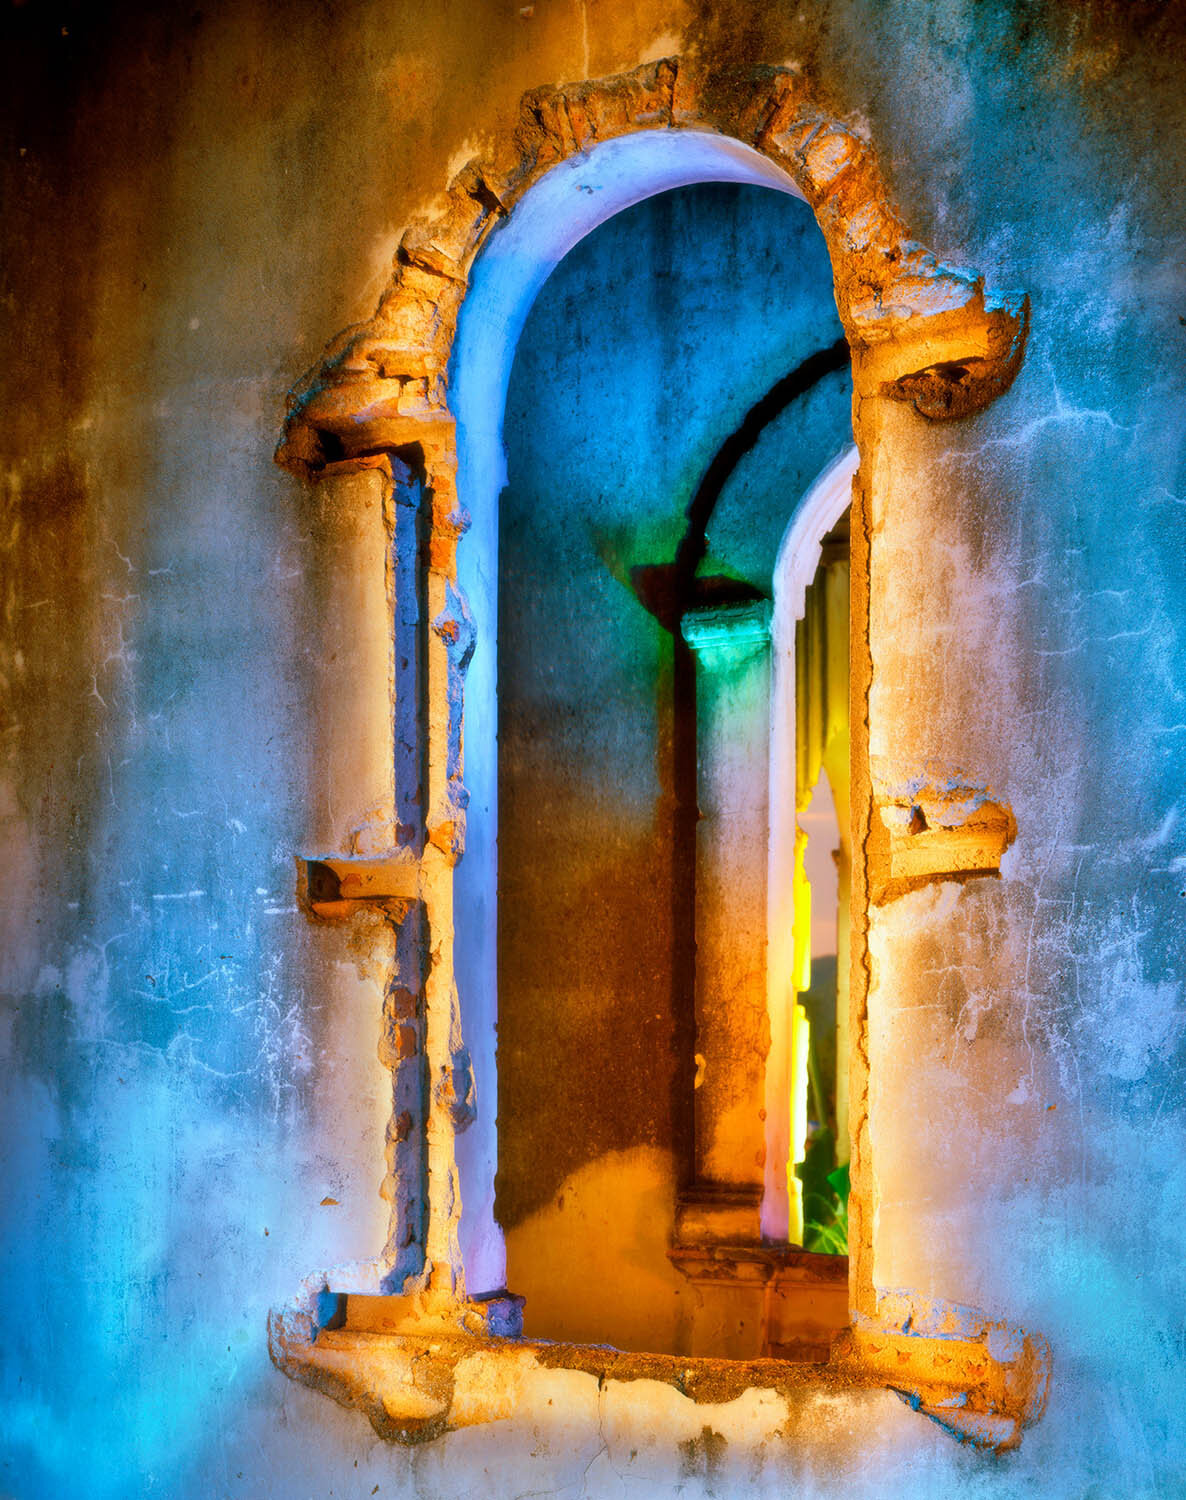 Two Arches, Adobe Ruins, Day and Night, Alamos, Mexico